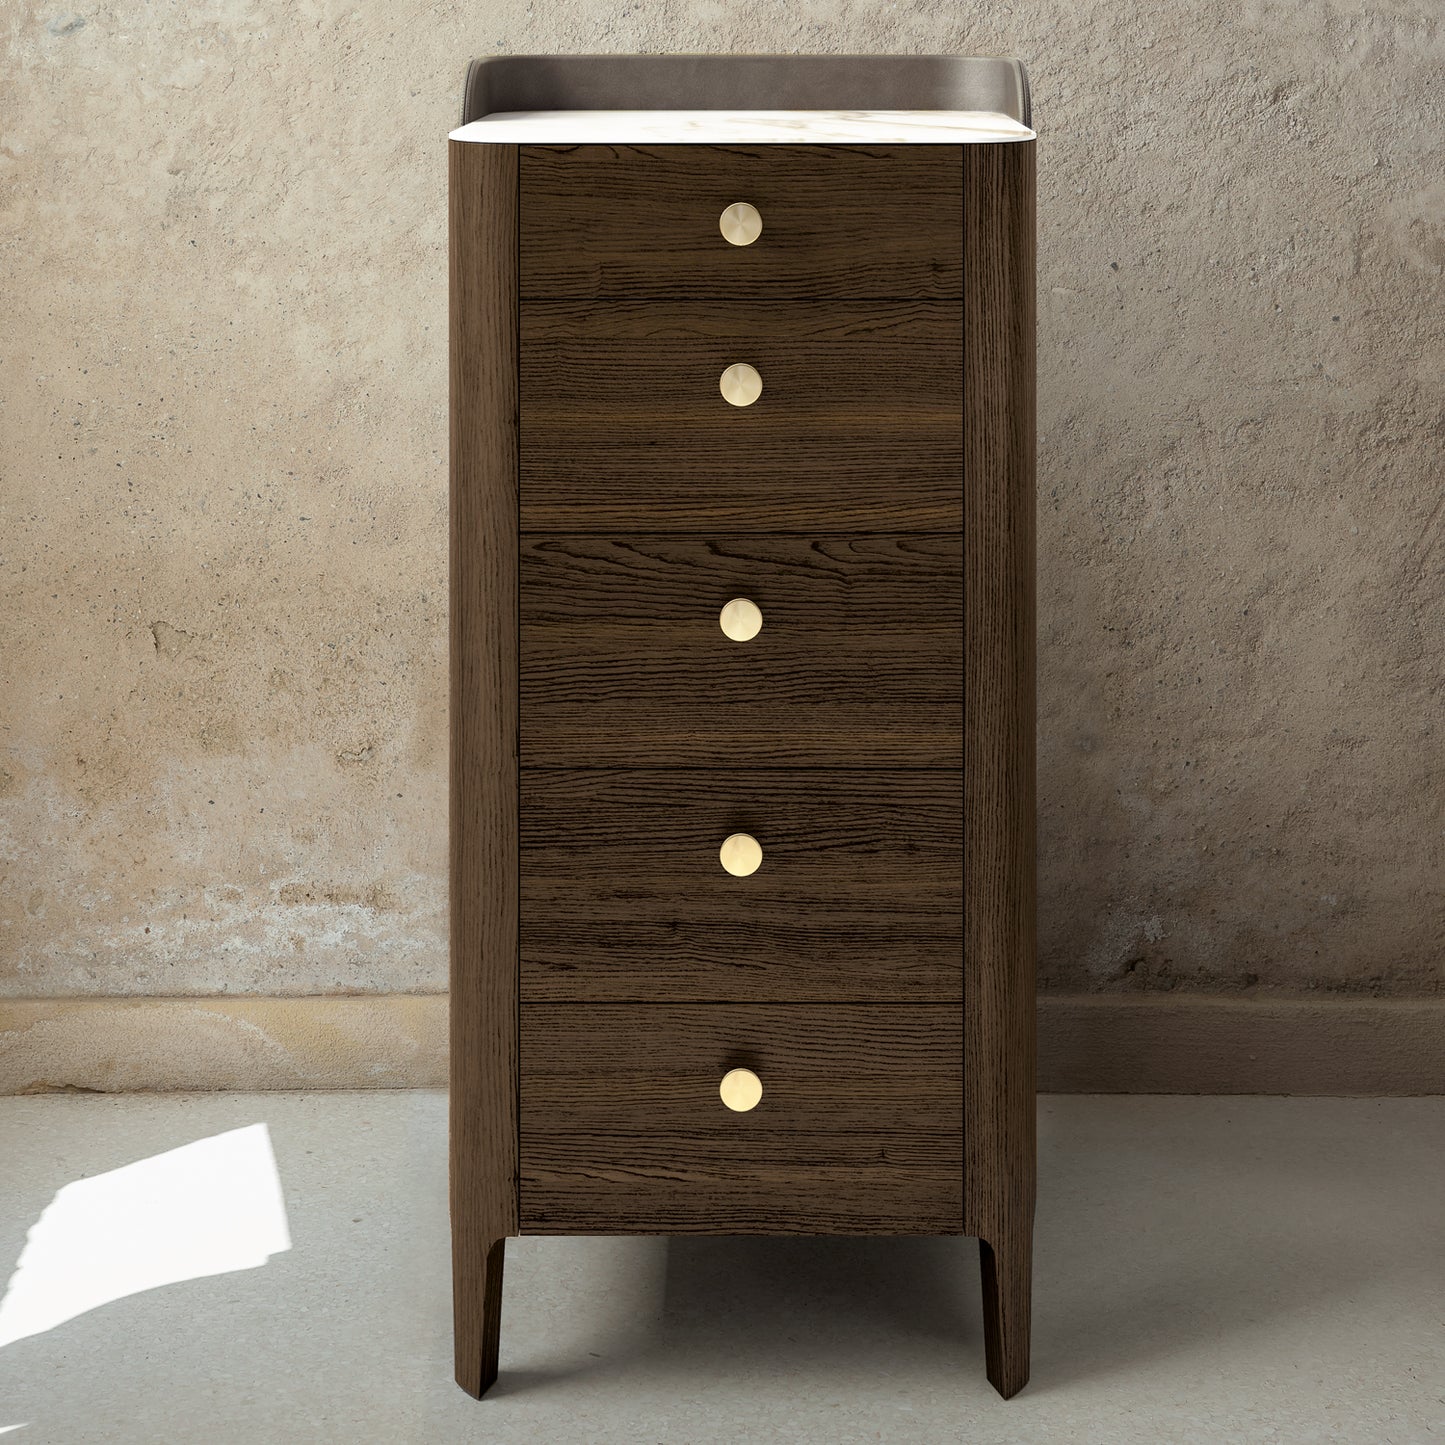 Settanta Collection Tallboy by Dall'Agnese